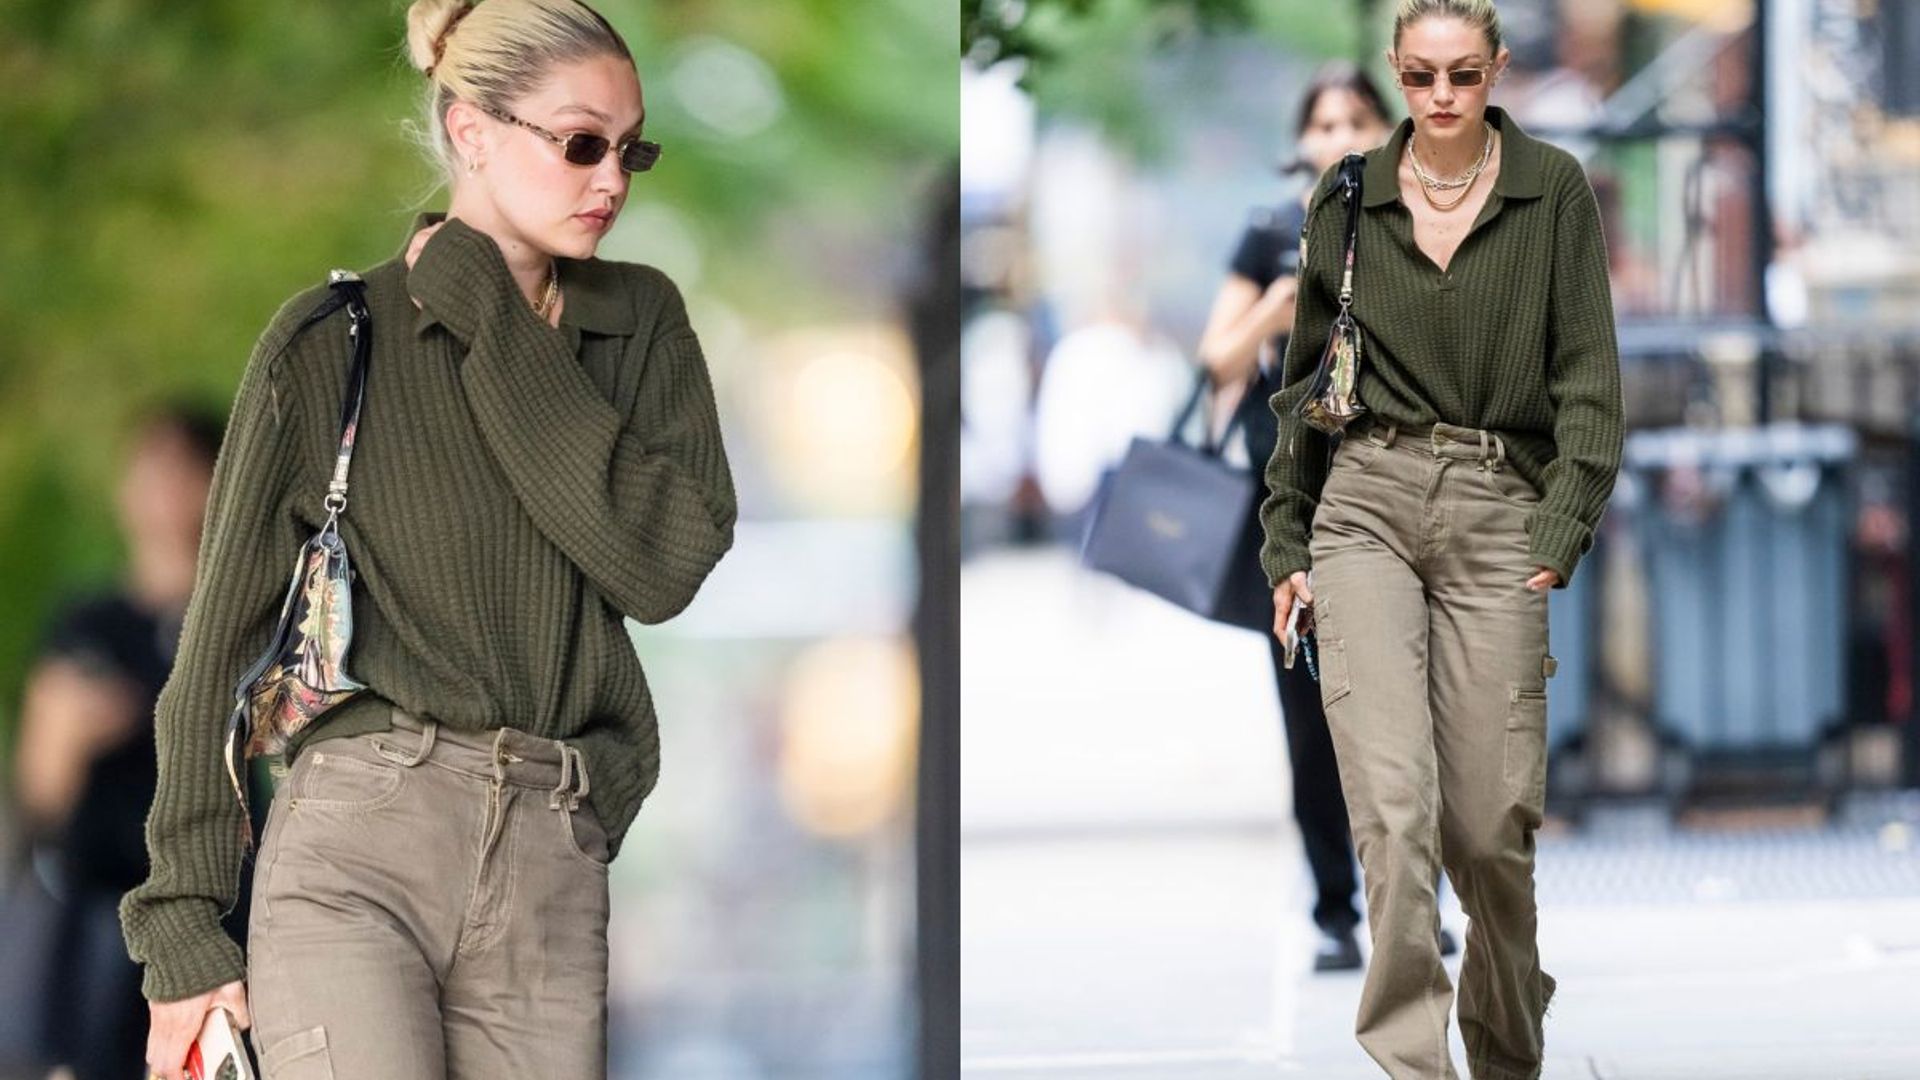 Gigi Hadid looks chic in a white shirt and black trousers during a solo  outing in